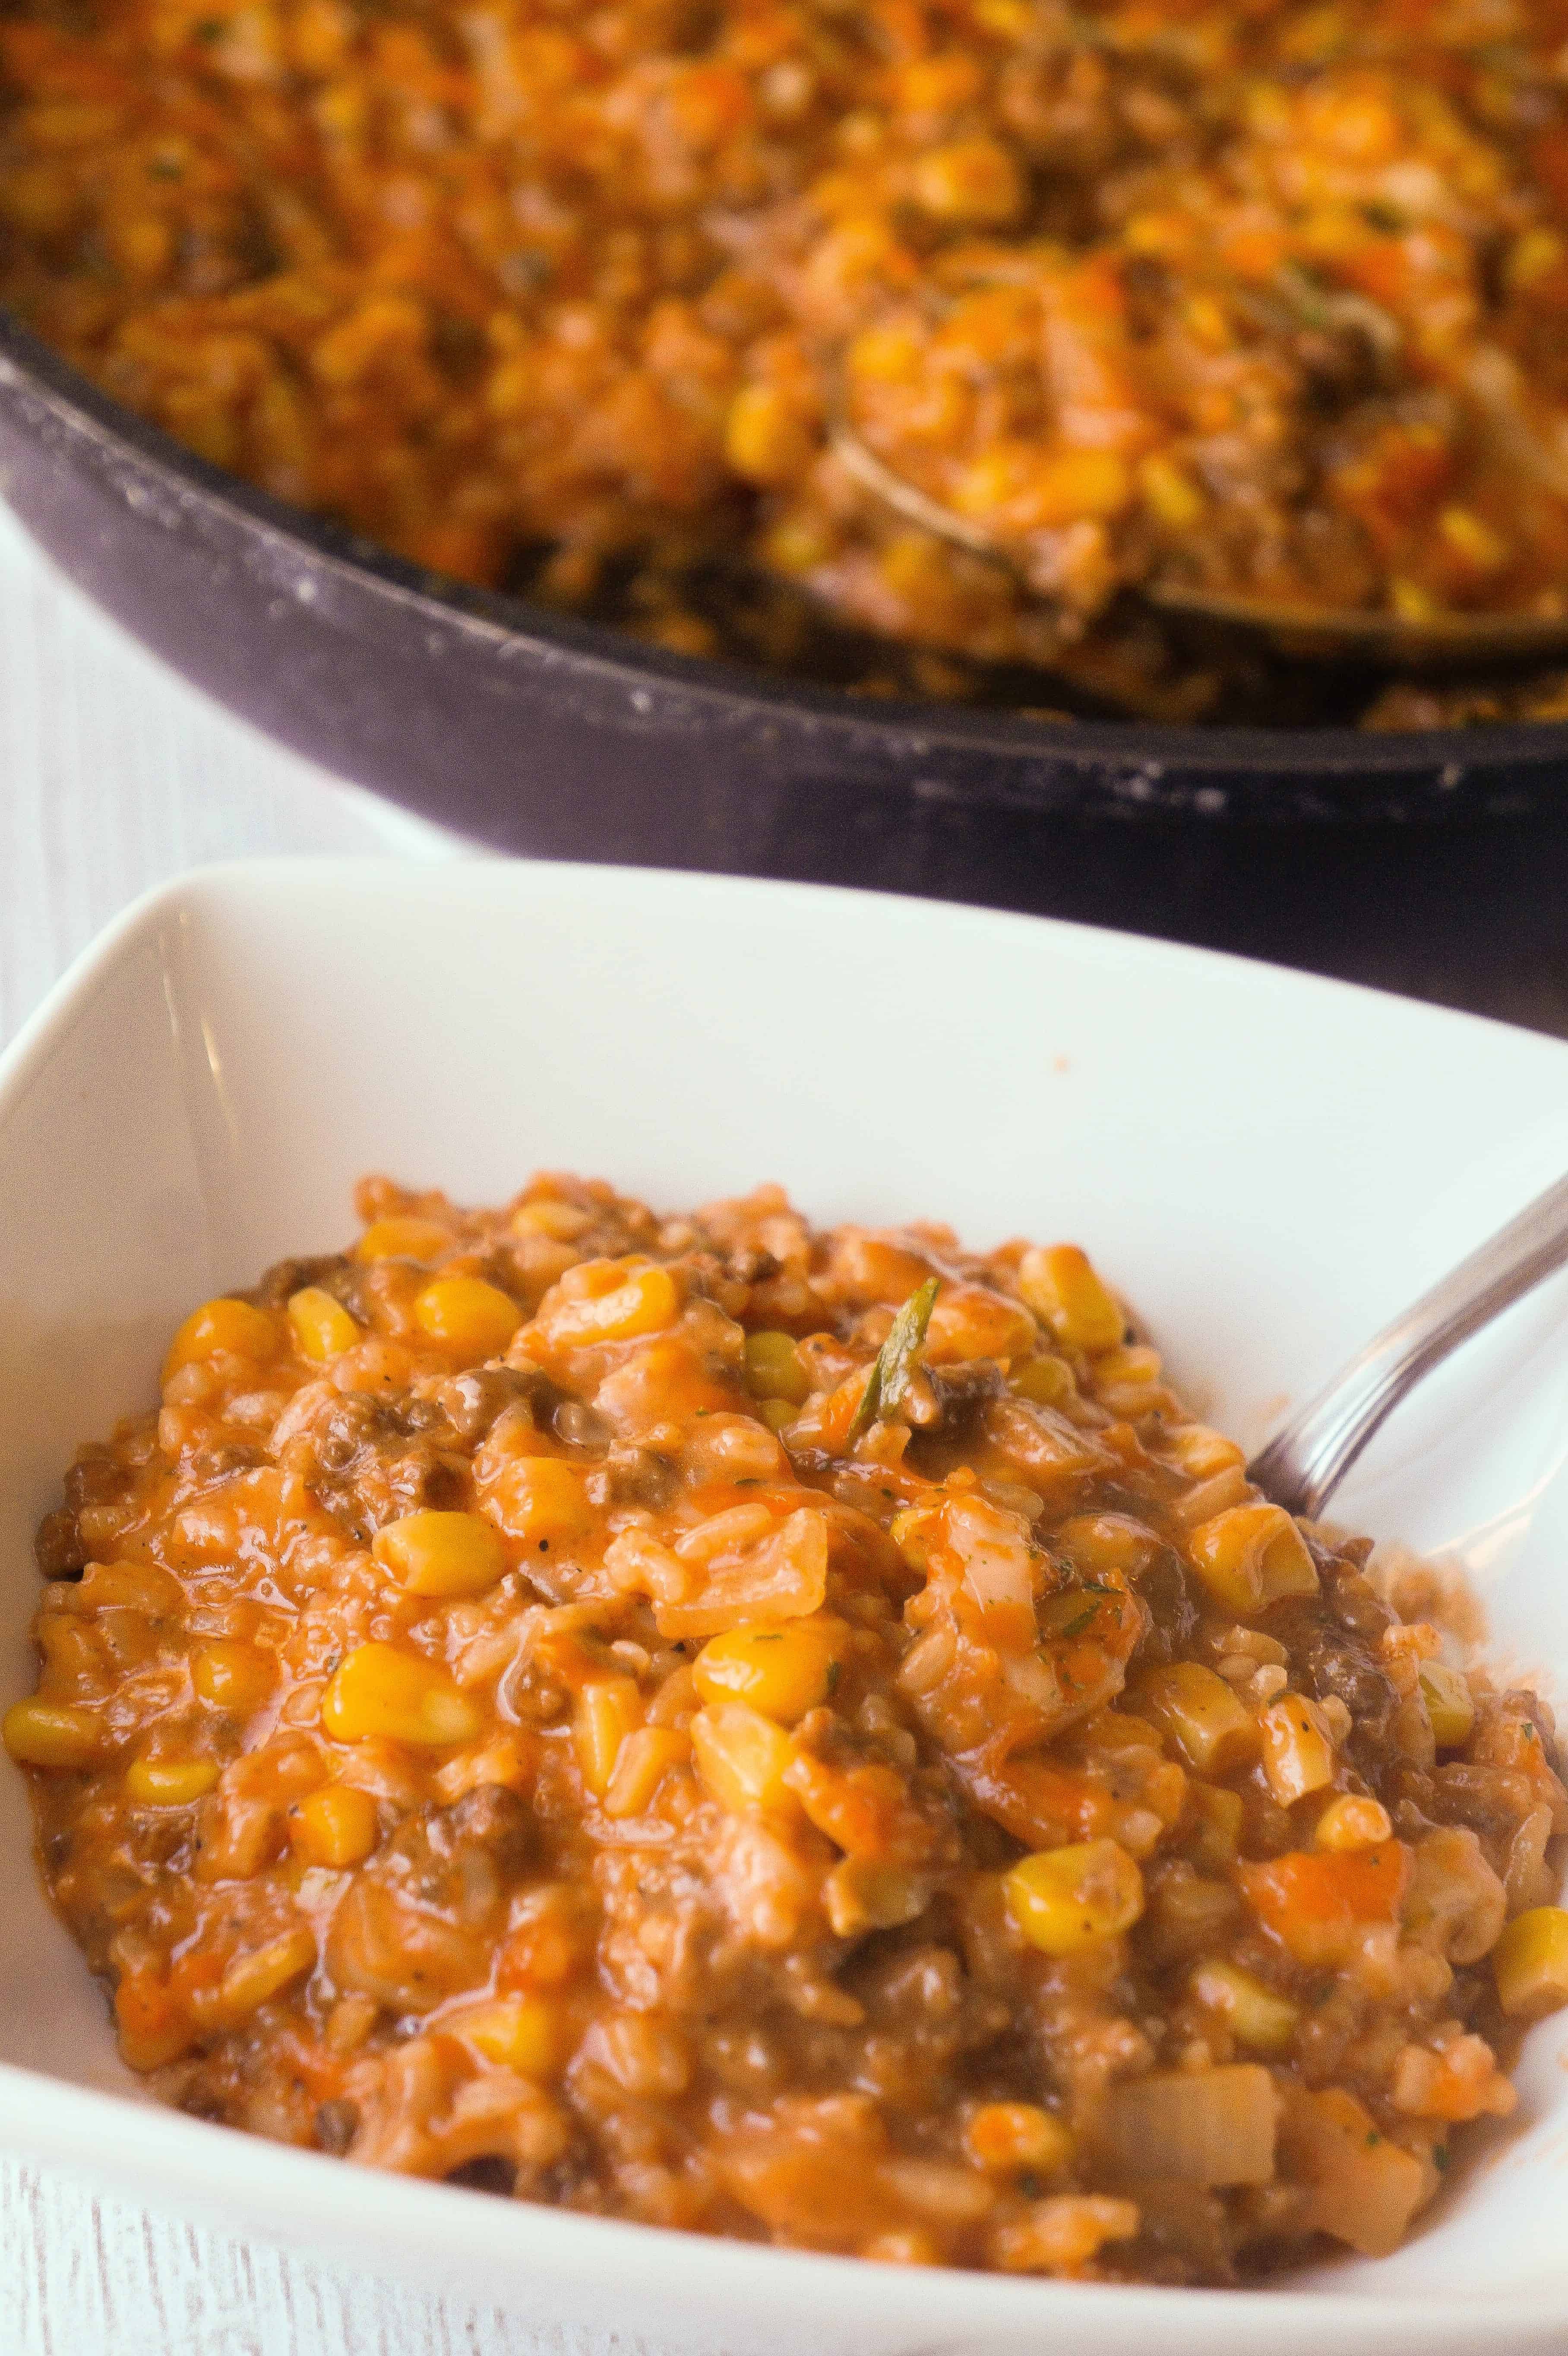 Cheesy Tomato Ground Beef and Rice is an easy stove top dinner recipe packed with flavour. This ground beef dish is made with cream of tomato soup, canned corn, instant rice and loaded with cheddar cheese.